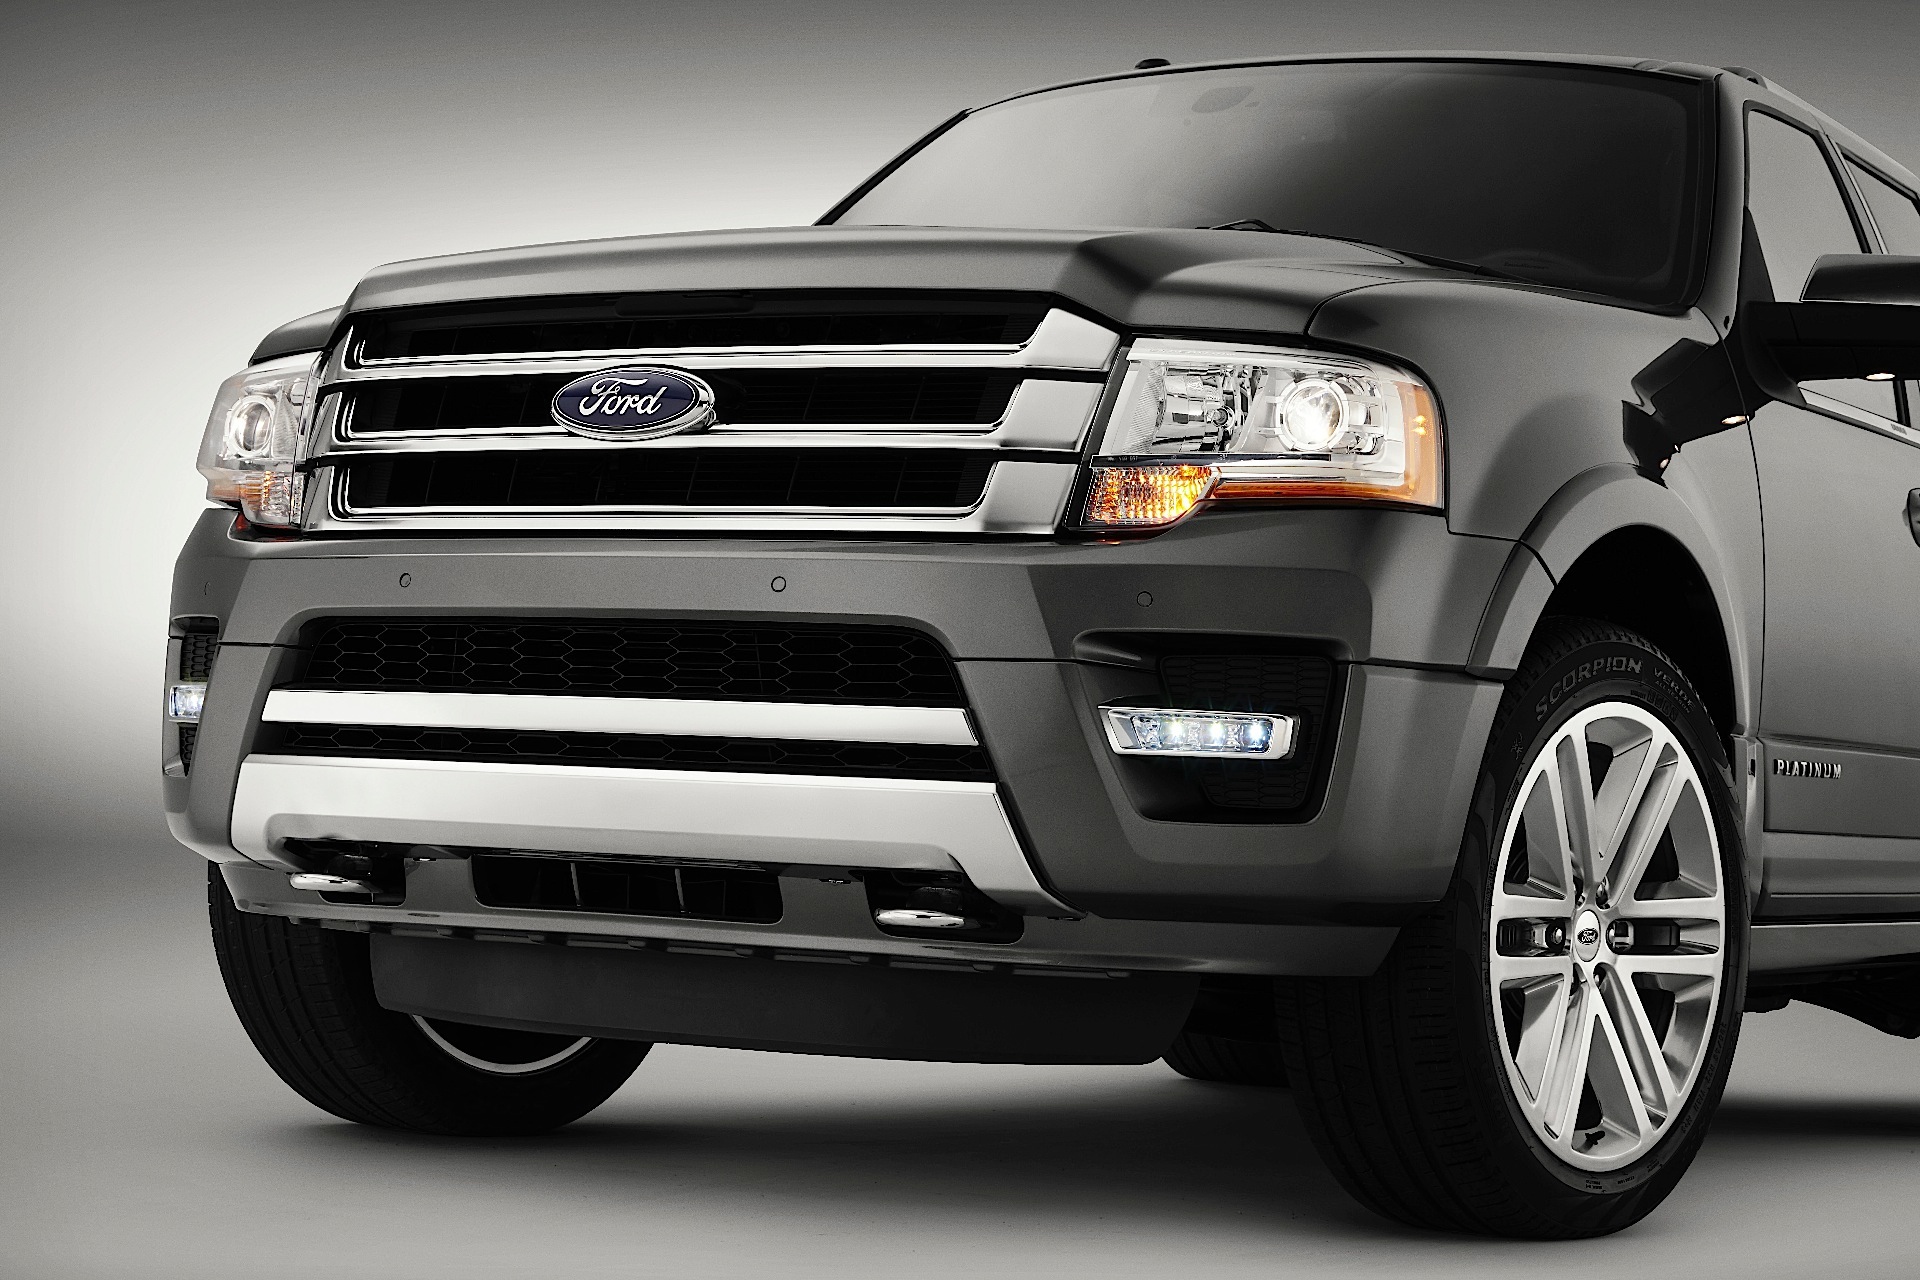 FORD Expedition - 2014, 2015, 2016, 2017 - autoevolution